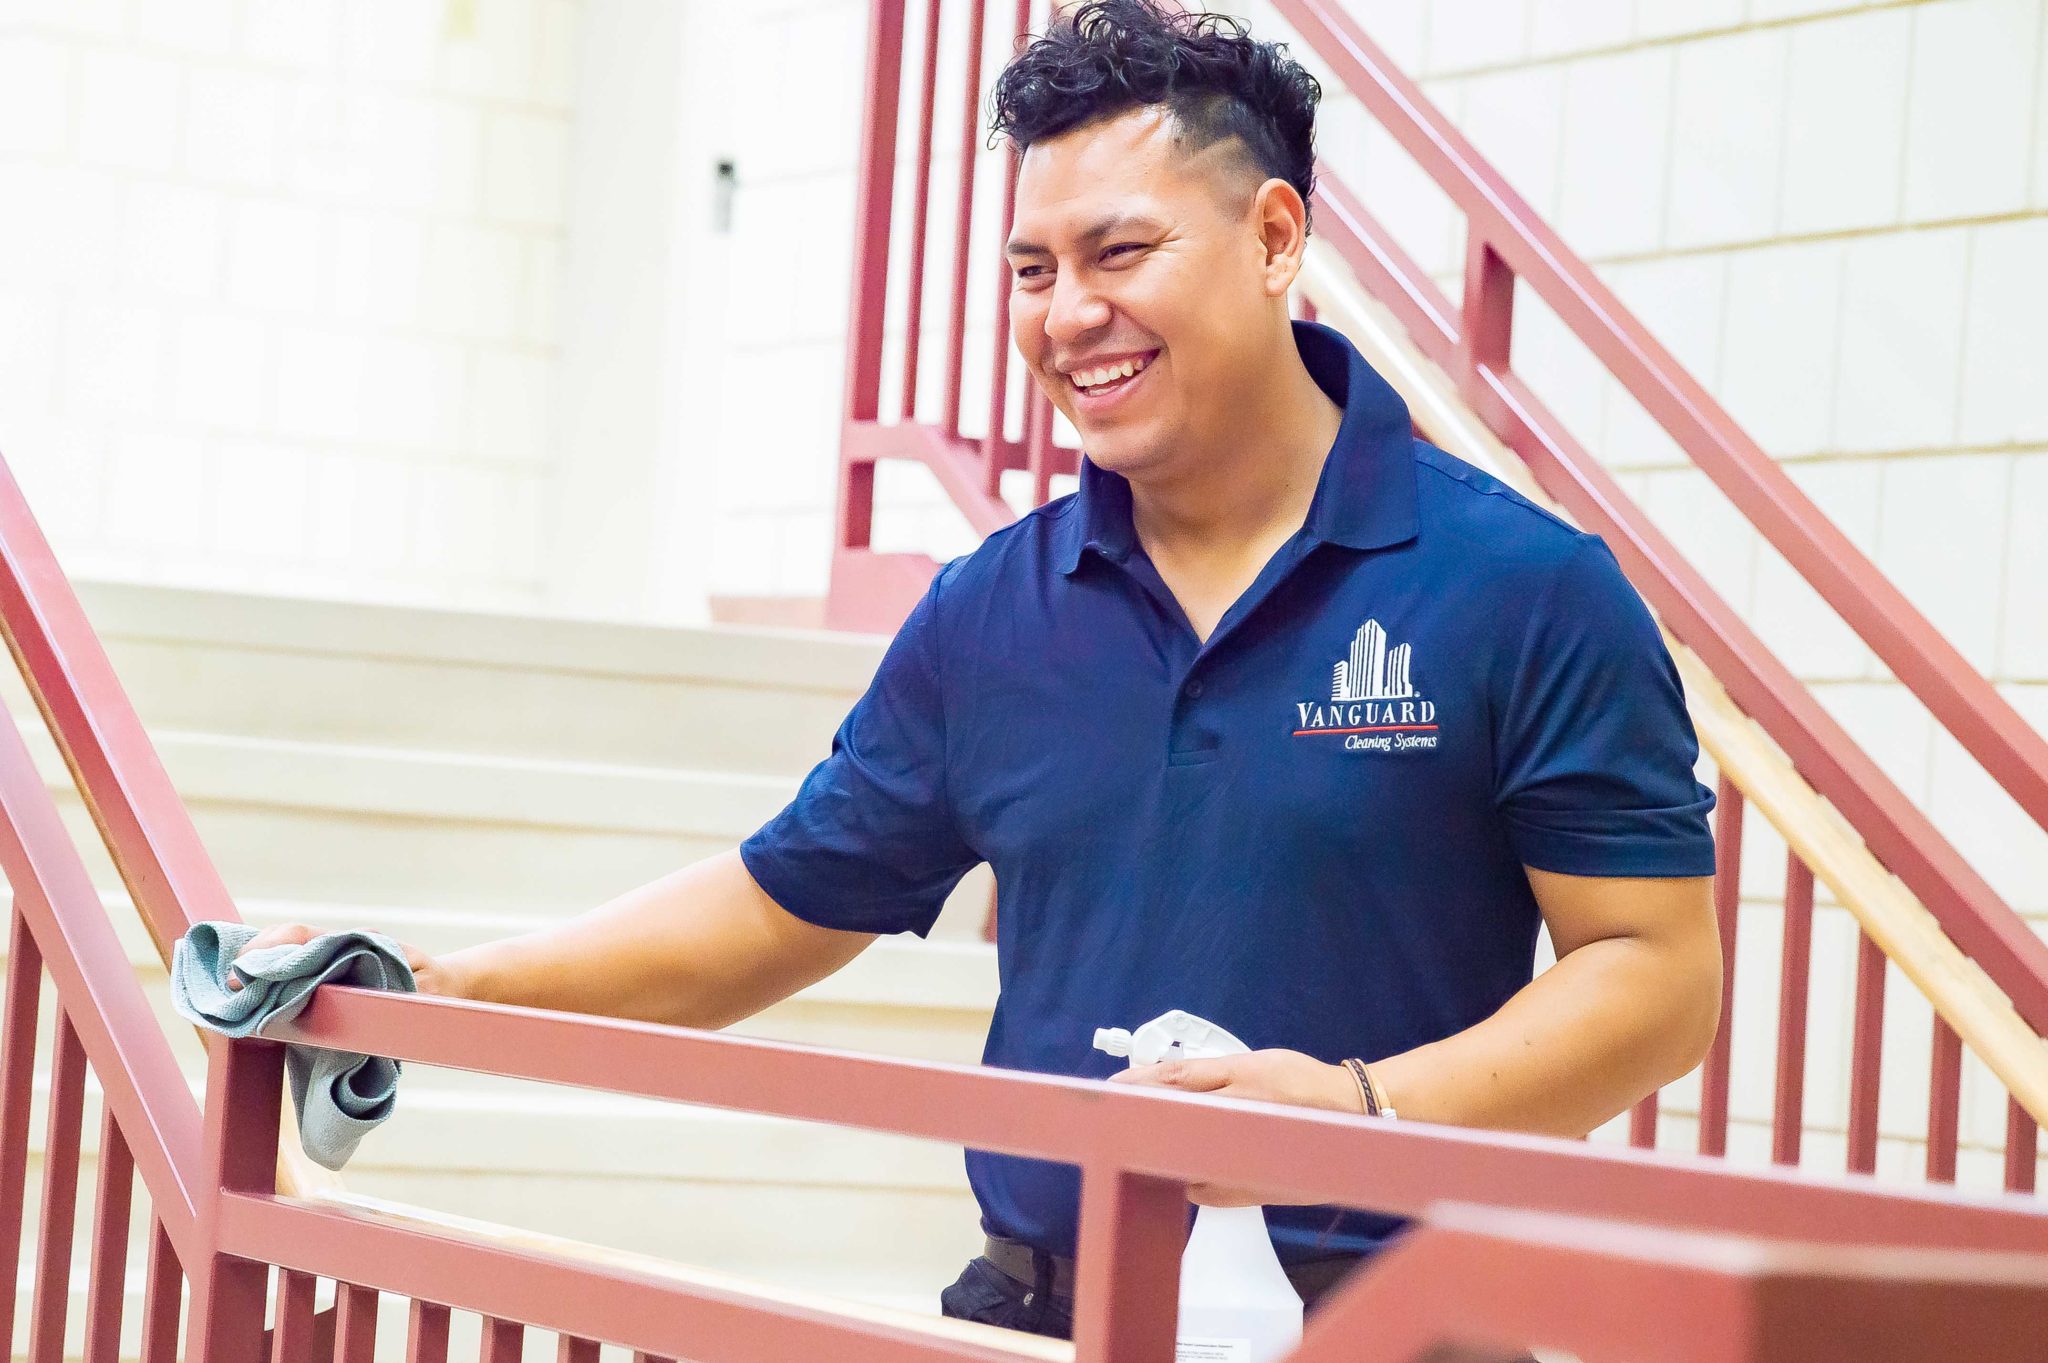 Vanguard cleaning systems employee smiling while working and cleaning a railing